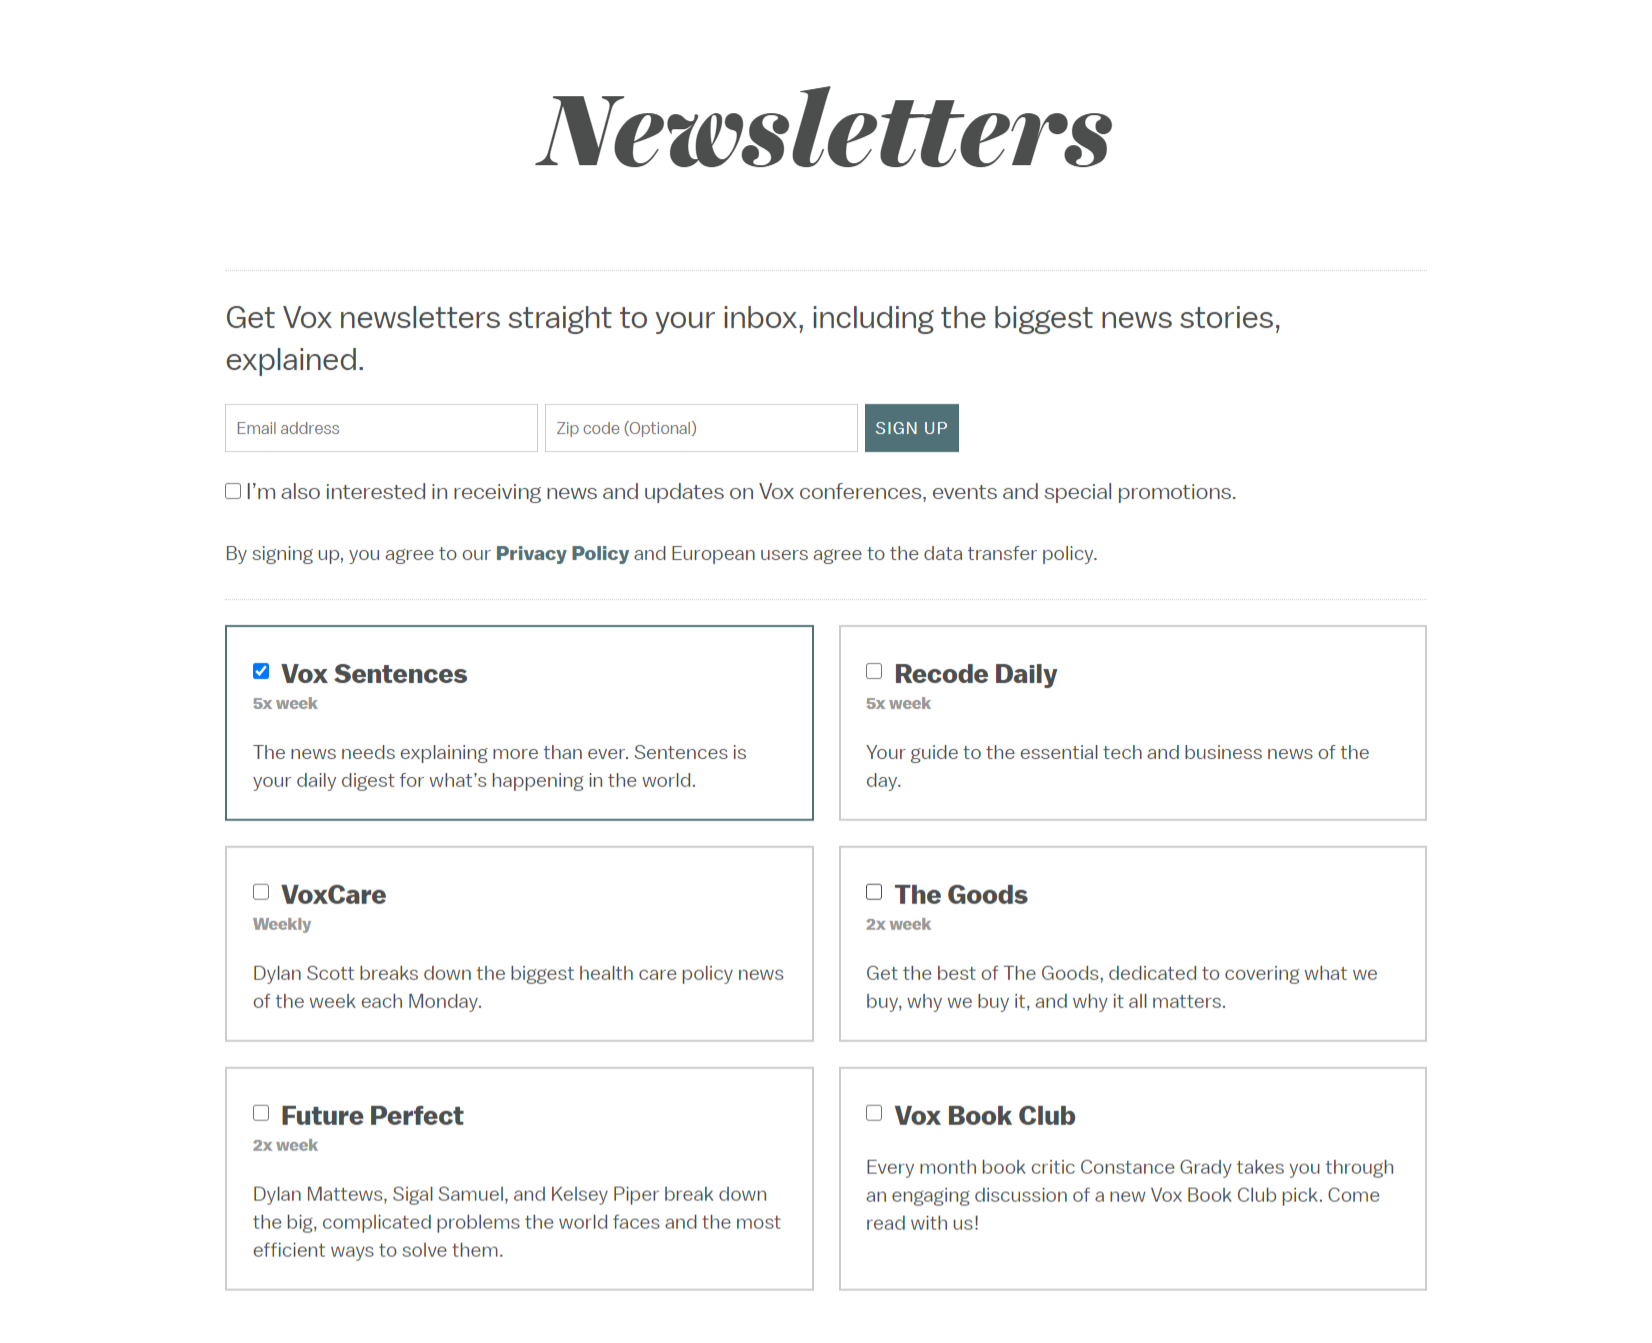 Vox’s newsletter sign up form uses checkboxes and a simple black and white design